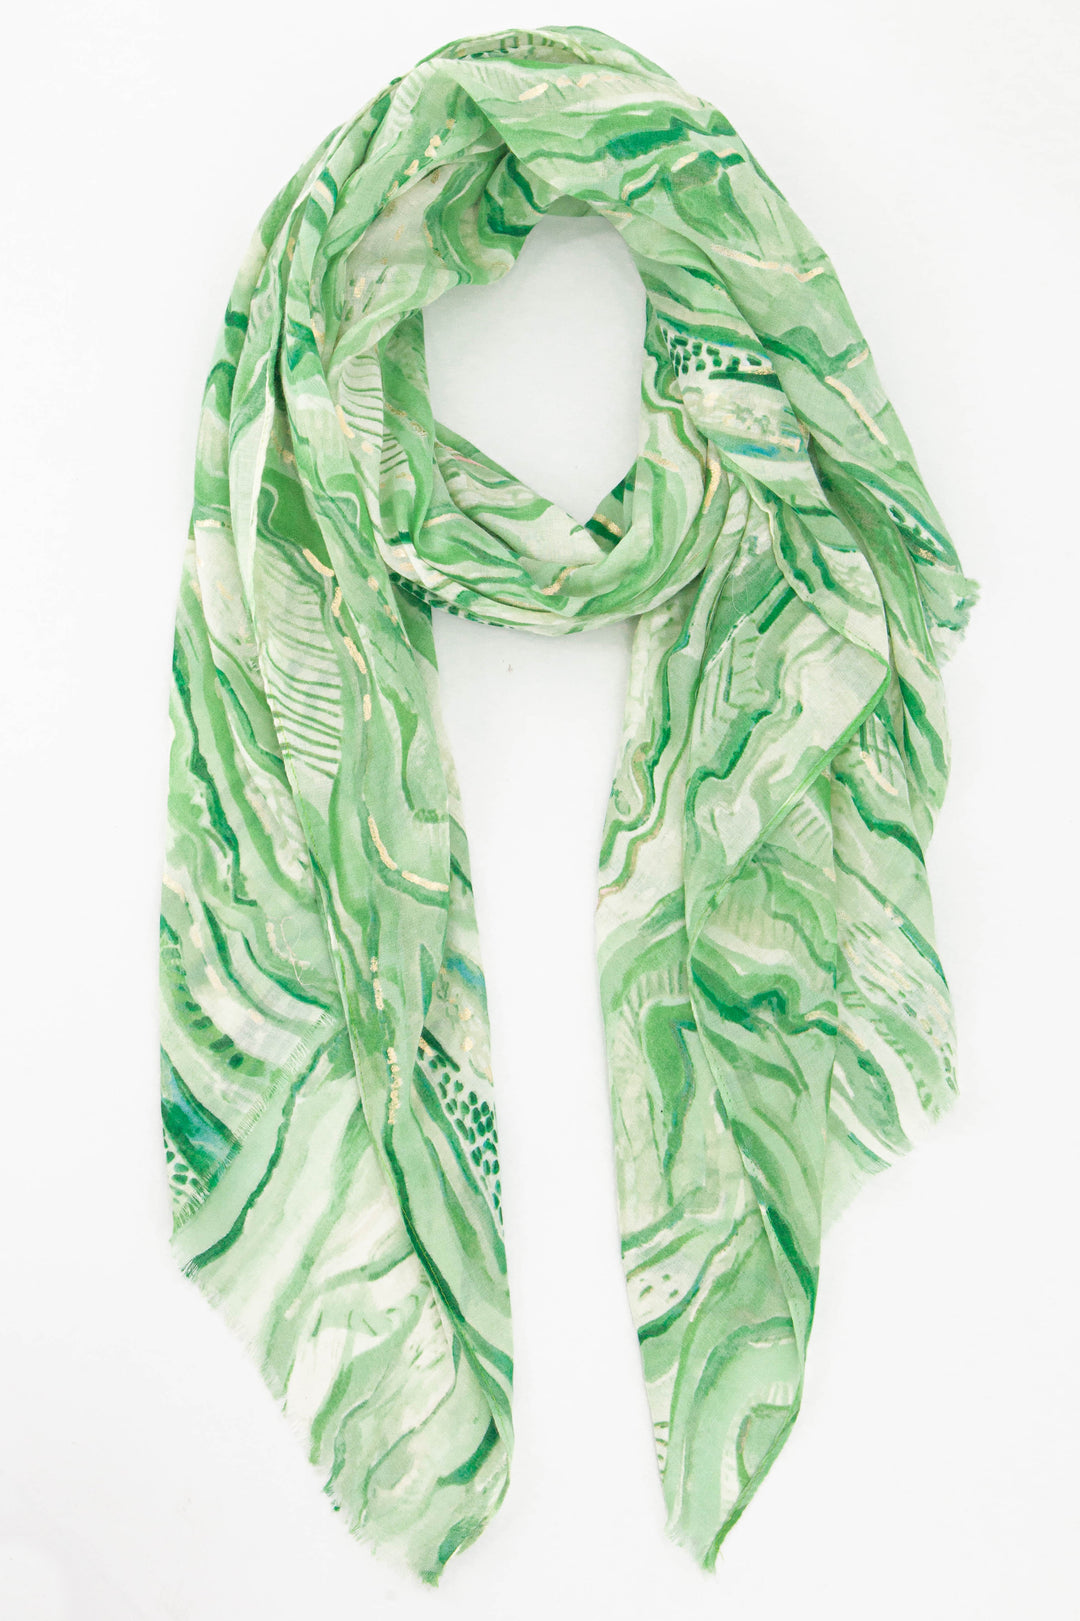 green wave pattern scarf with subtle gold foil accents 